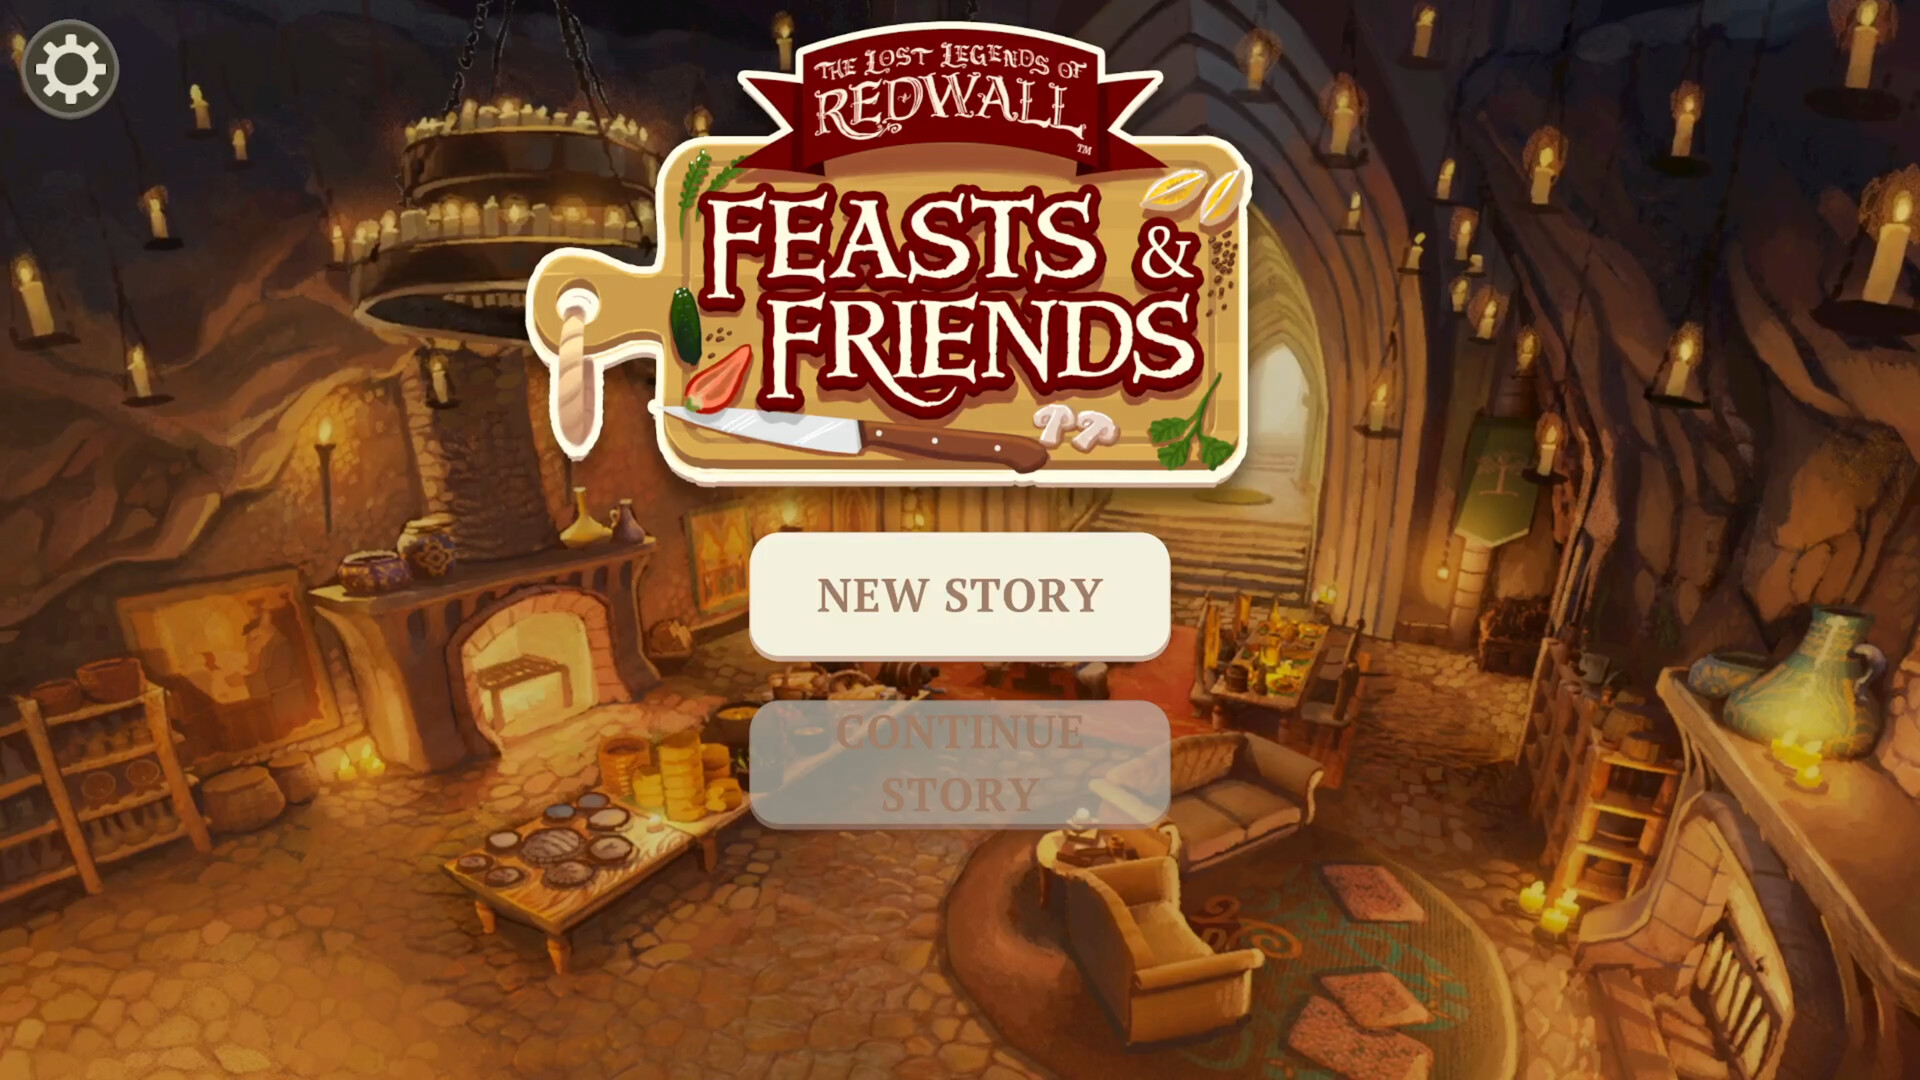 [$ 3.38] The Lost Legends of Redwall: Feasts & Friends Steam CD Key